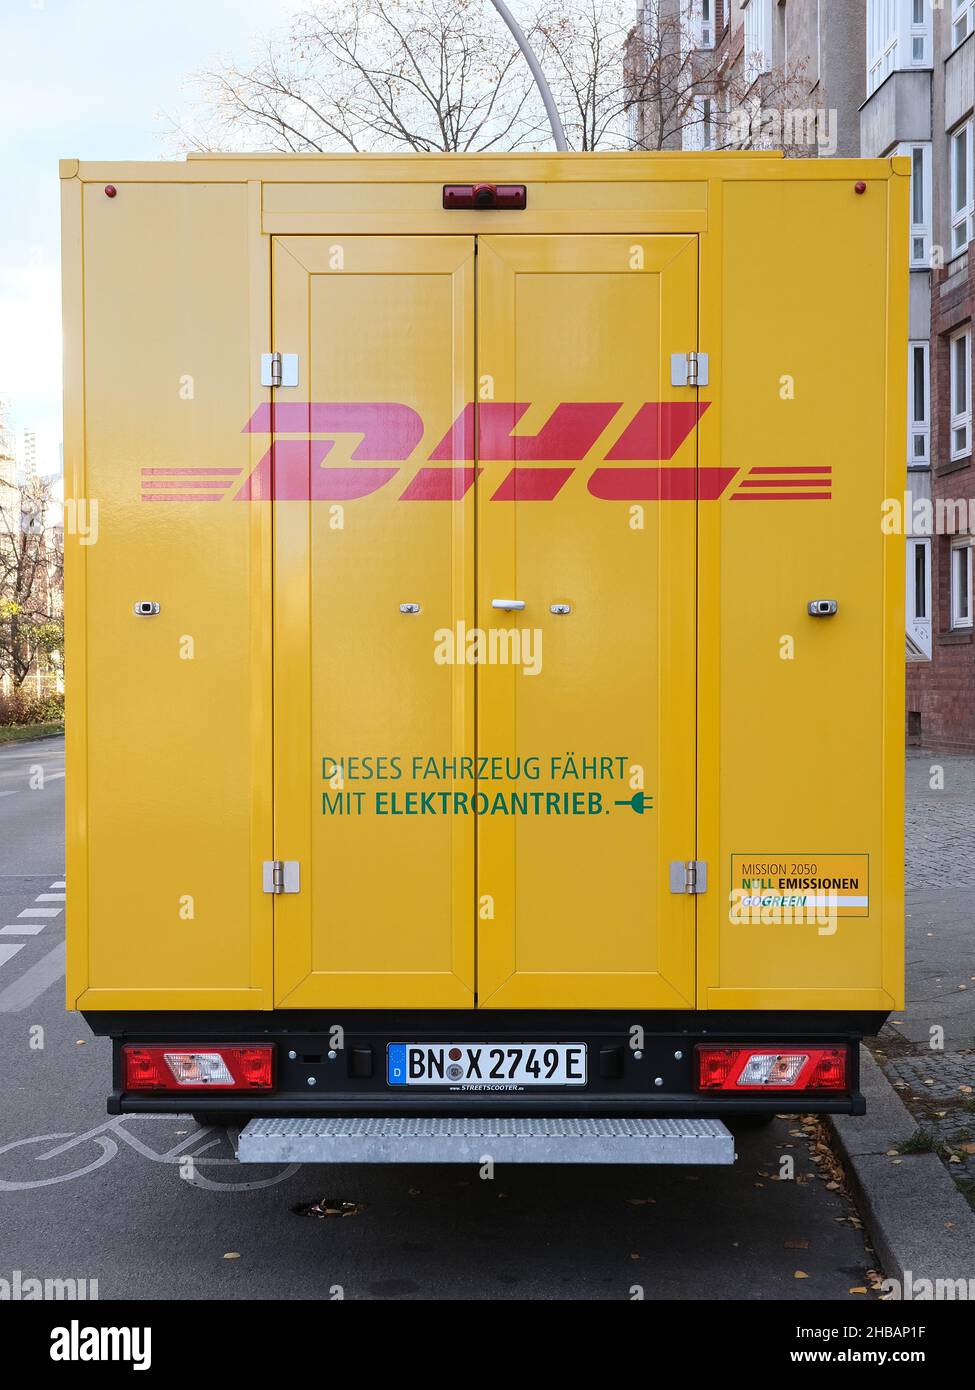 Dhl Transporter High Resolution Stock Photography and Images - Alamy